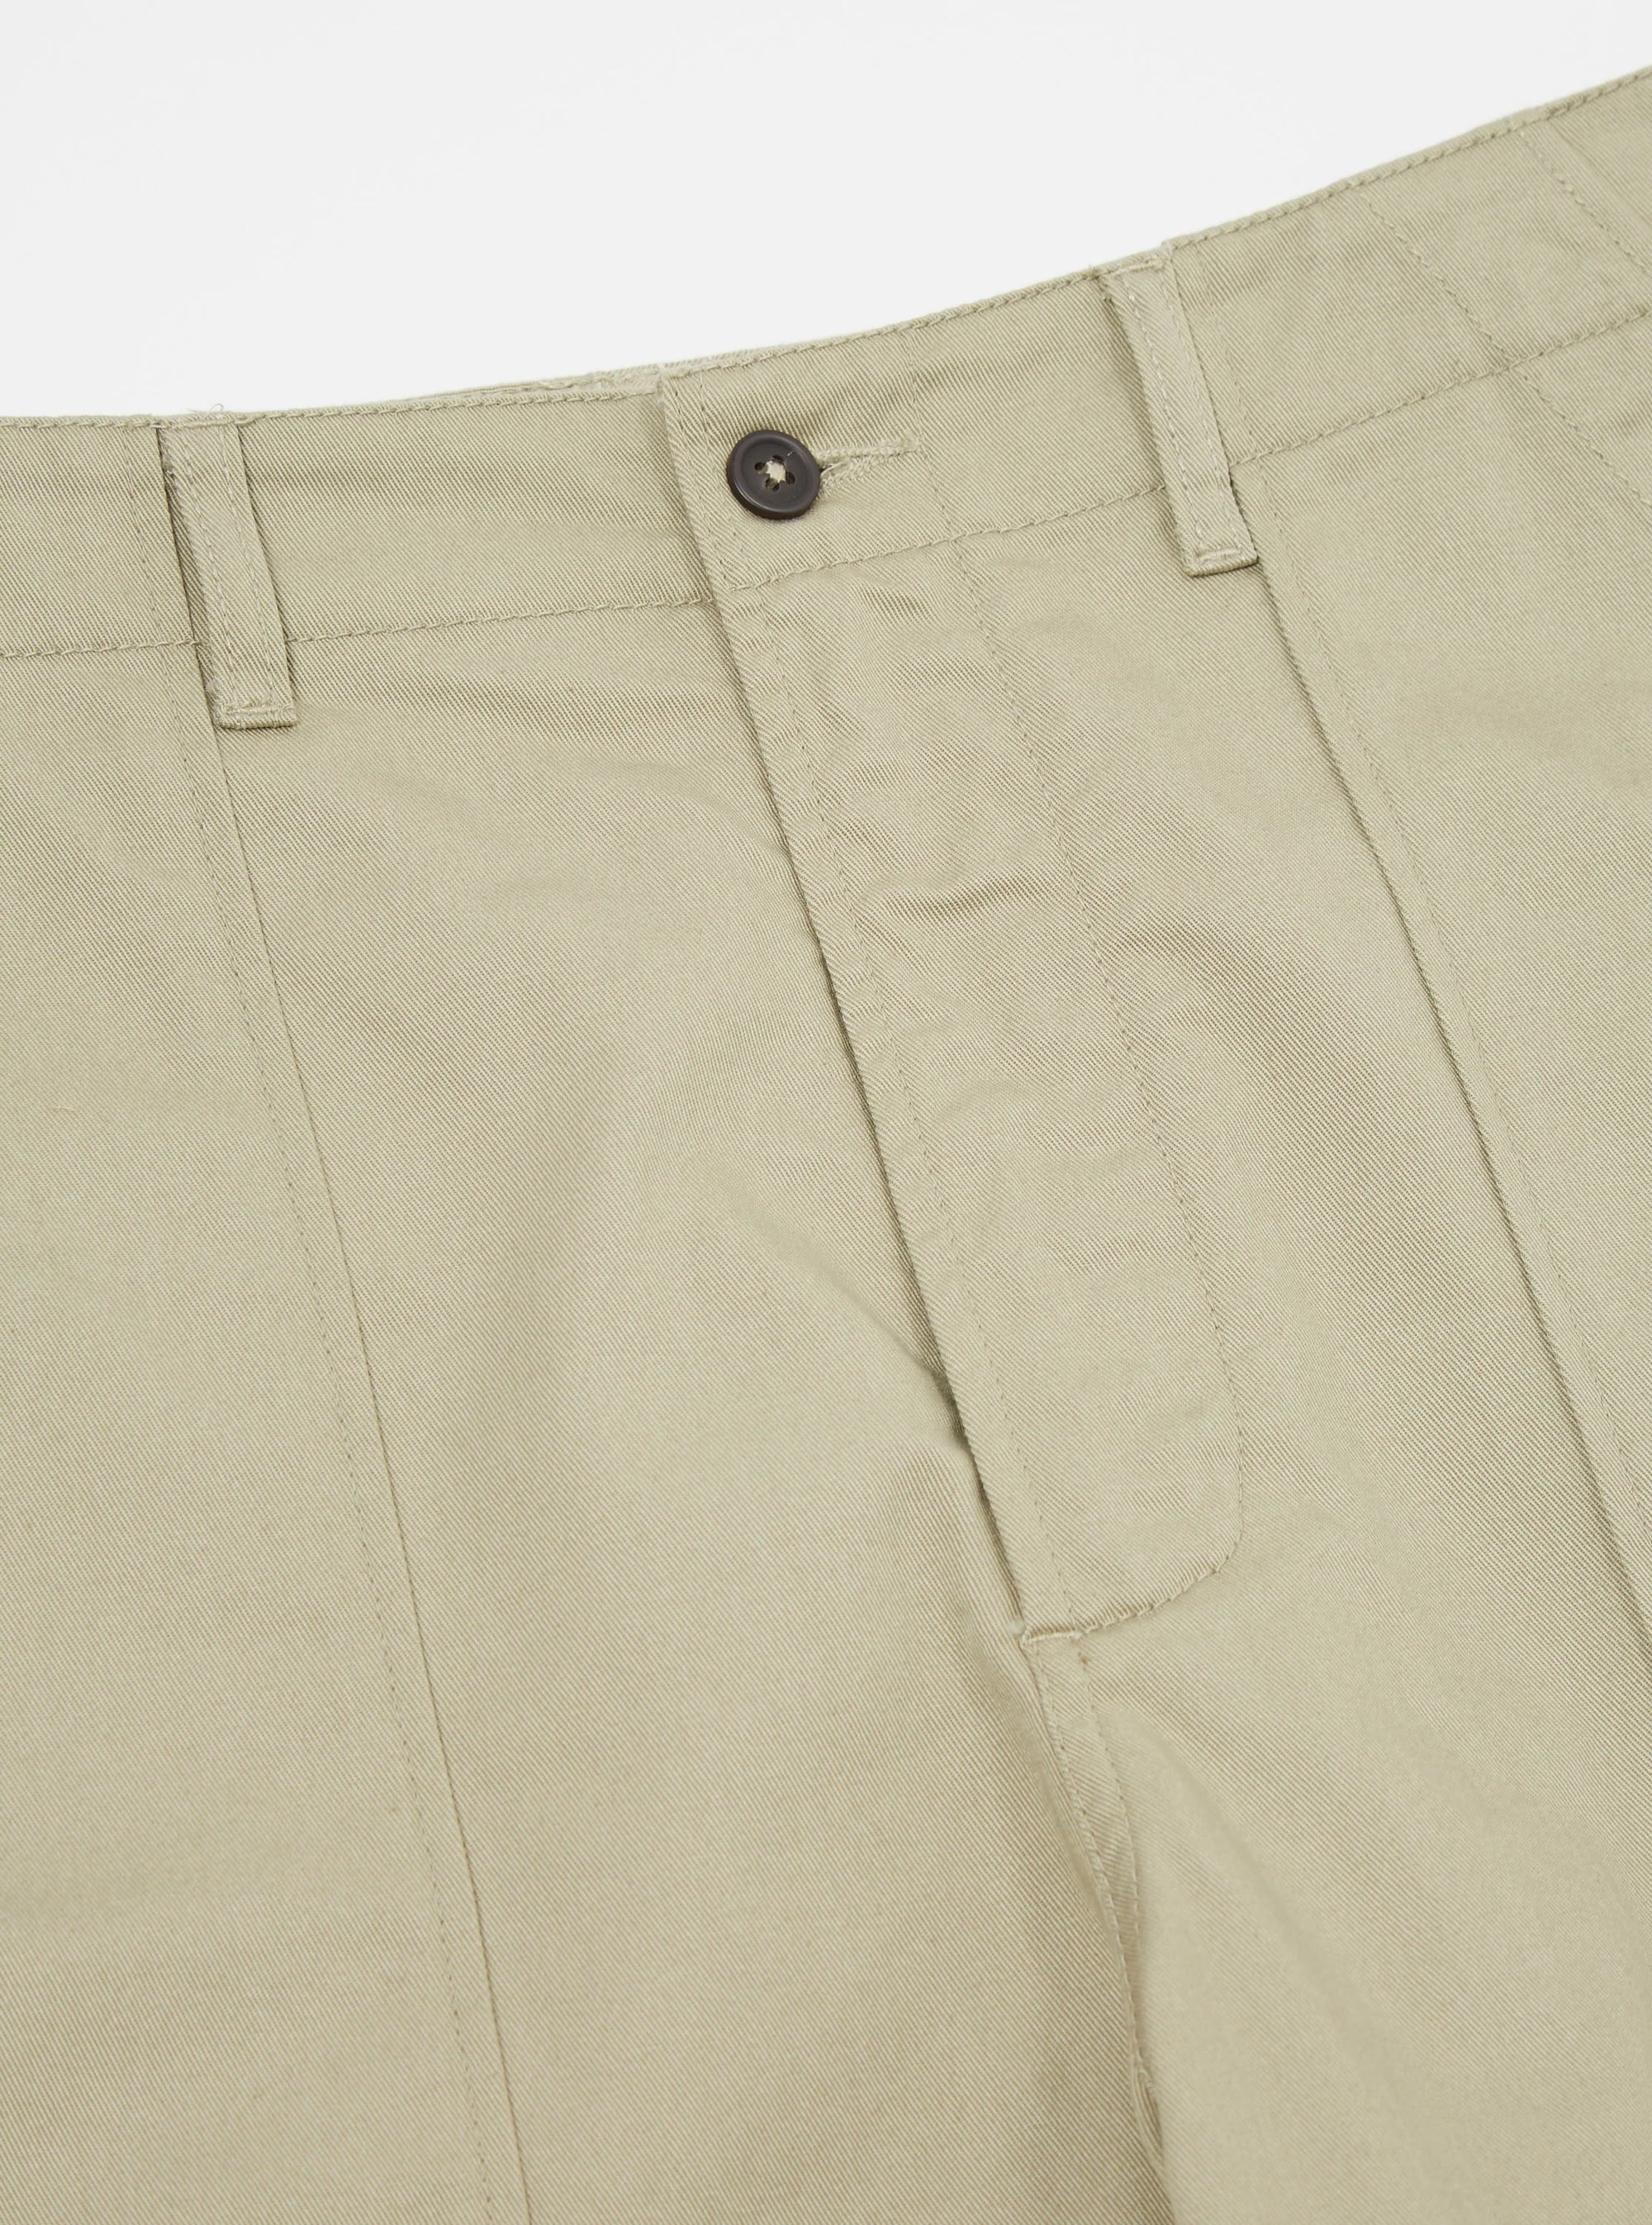 Twill Fatigue Pant STONE
• Product Code: REF 00132.
• Straight fit.
• Zip fly.
• Buckle waist adjusters.
• Two front patch pockets.
• Two rear buttoned flap patch pockets.
• Fabric Content: 100% Cotton, 100% Cotton Trim.
• Washcare: Wash at 30 degrees. Do not bleach. Do not tumble dry. Warm iron. Do not dry clean. Wash like colours together.  UNIVERSAL WORKS